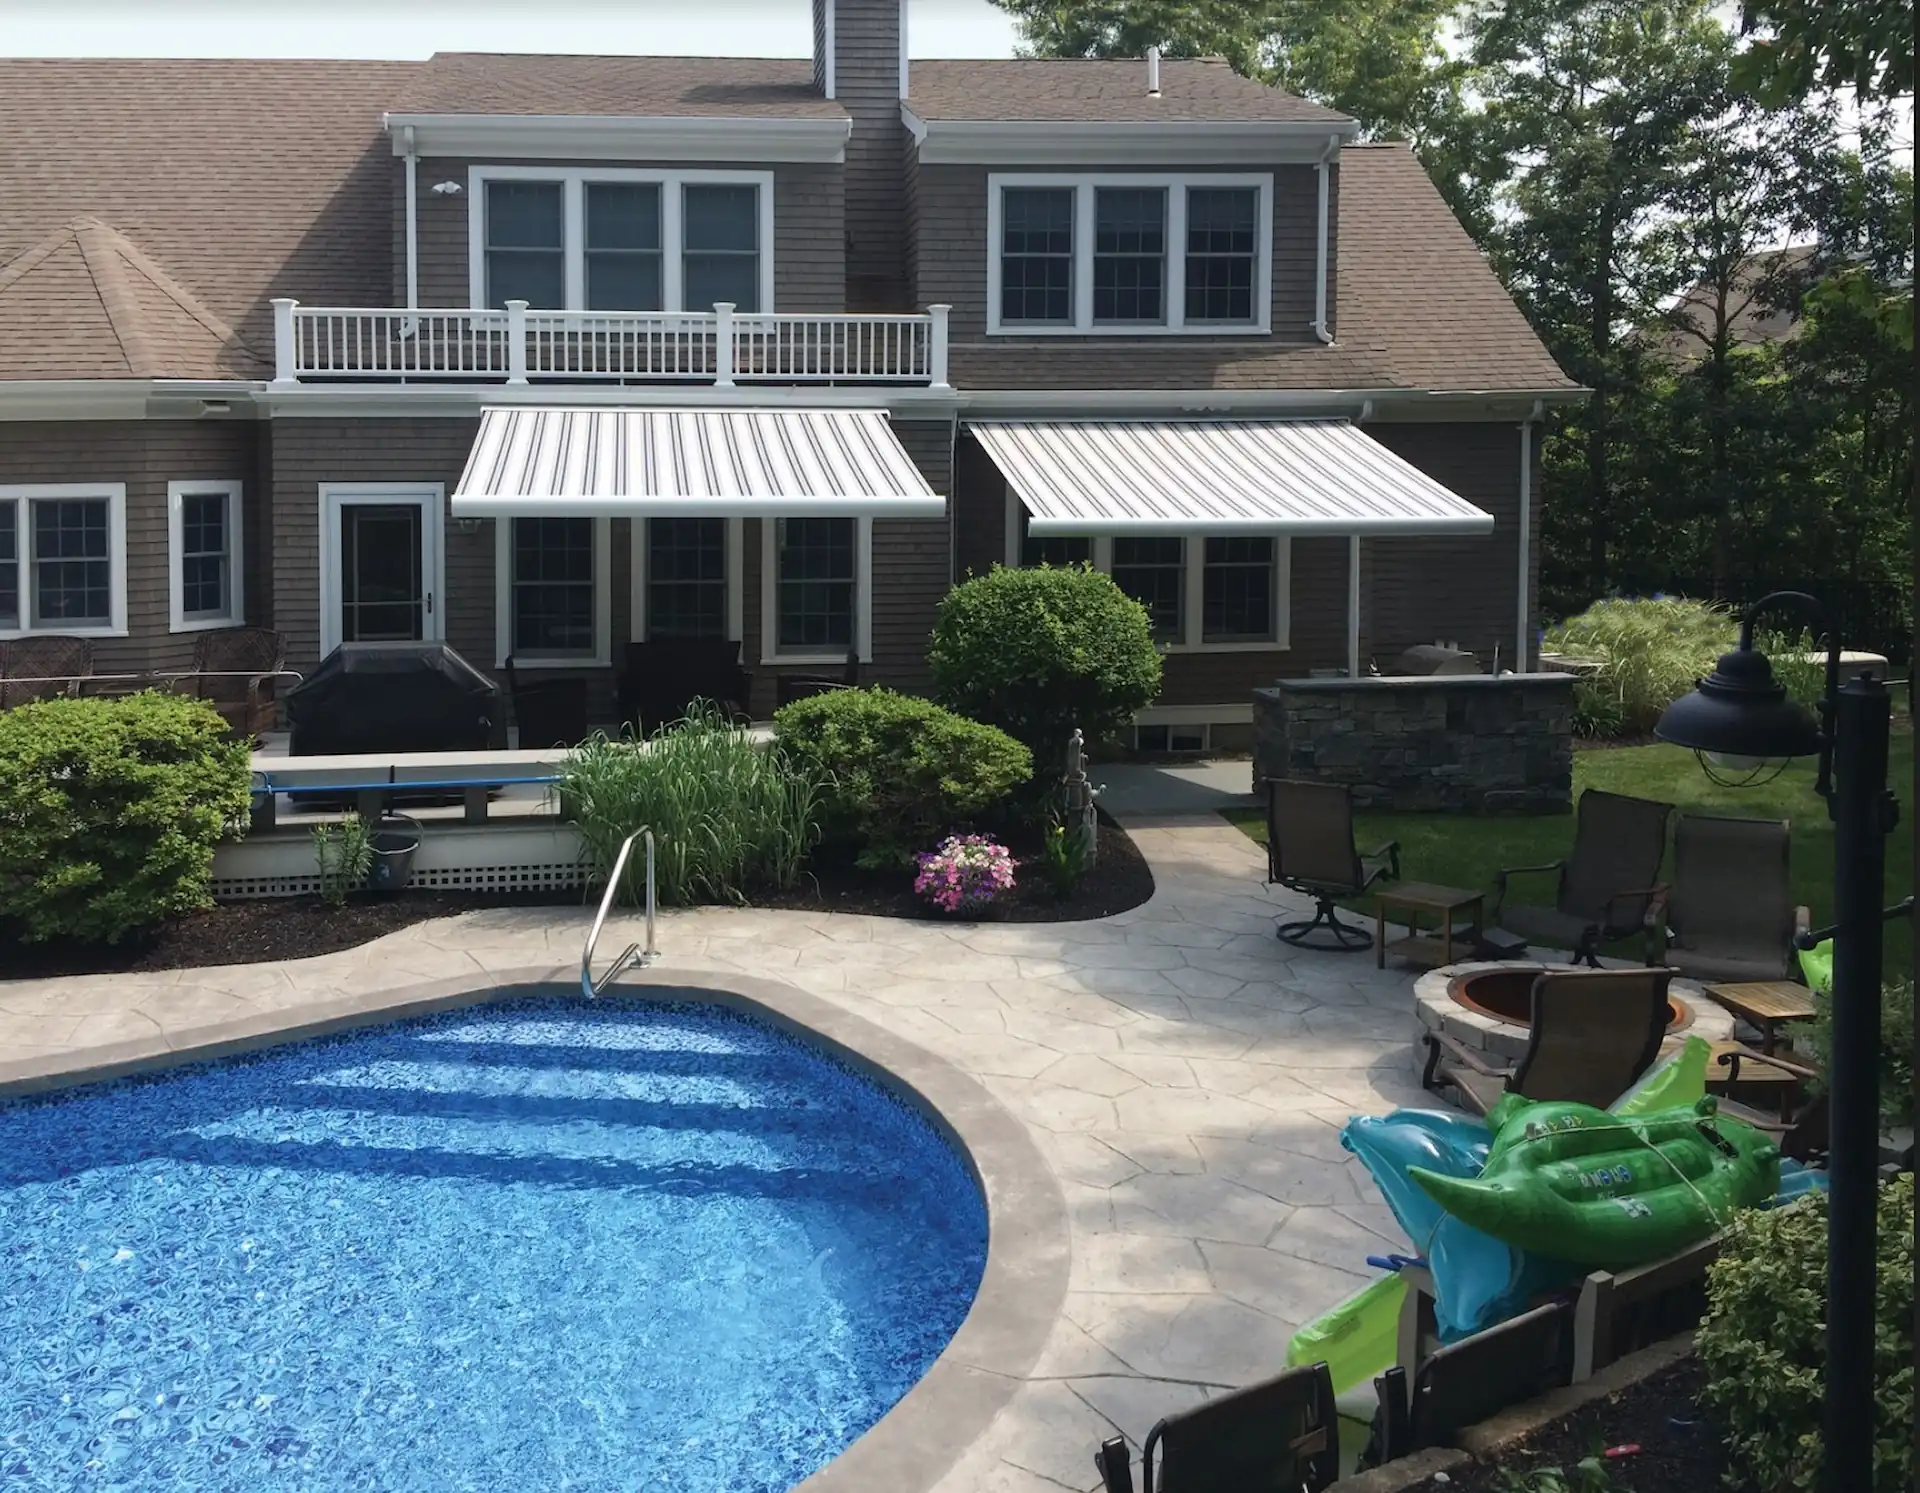 Exterior shot of a pool deck situated next to a stylish, brown house with 2 striped roll up awnings extended over the patio.